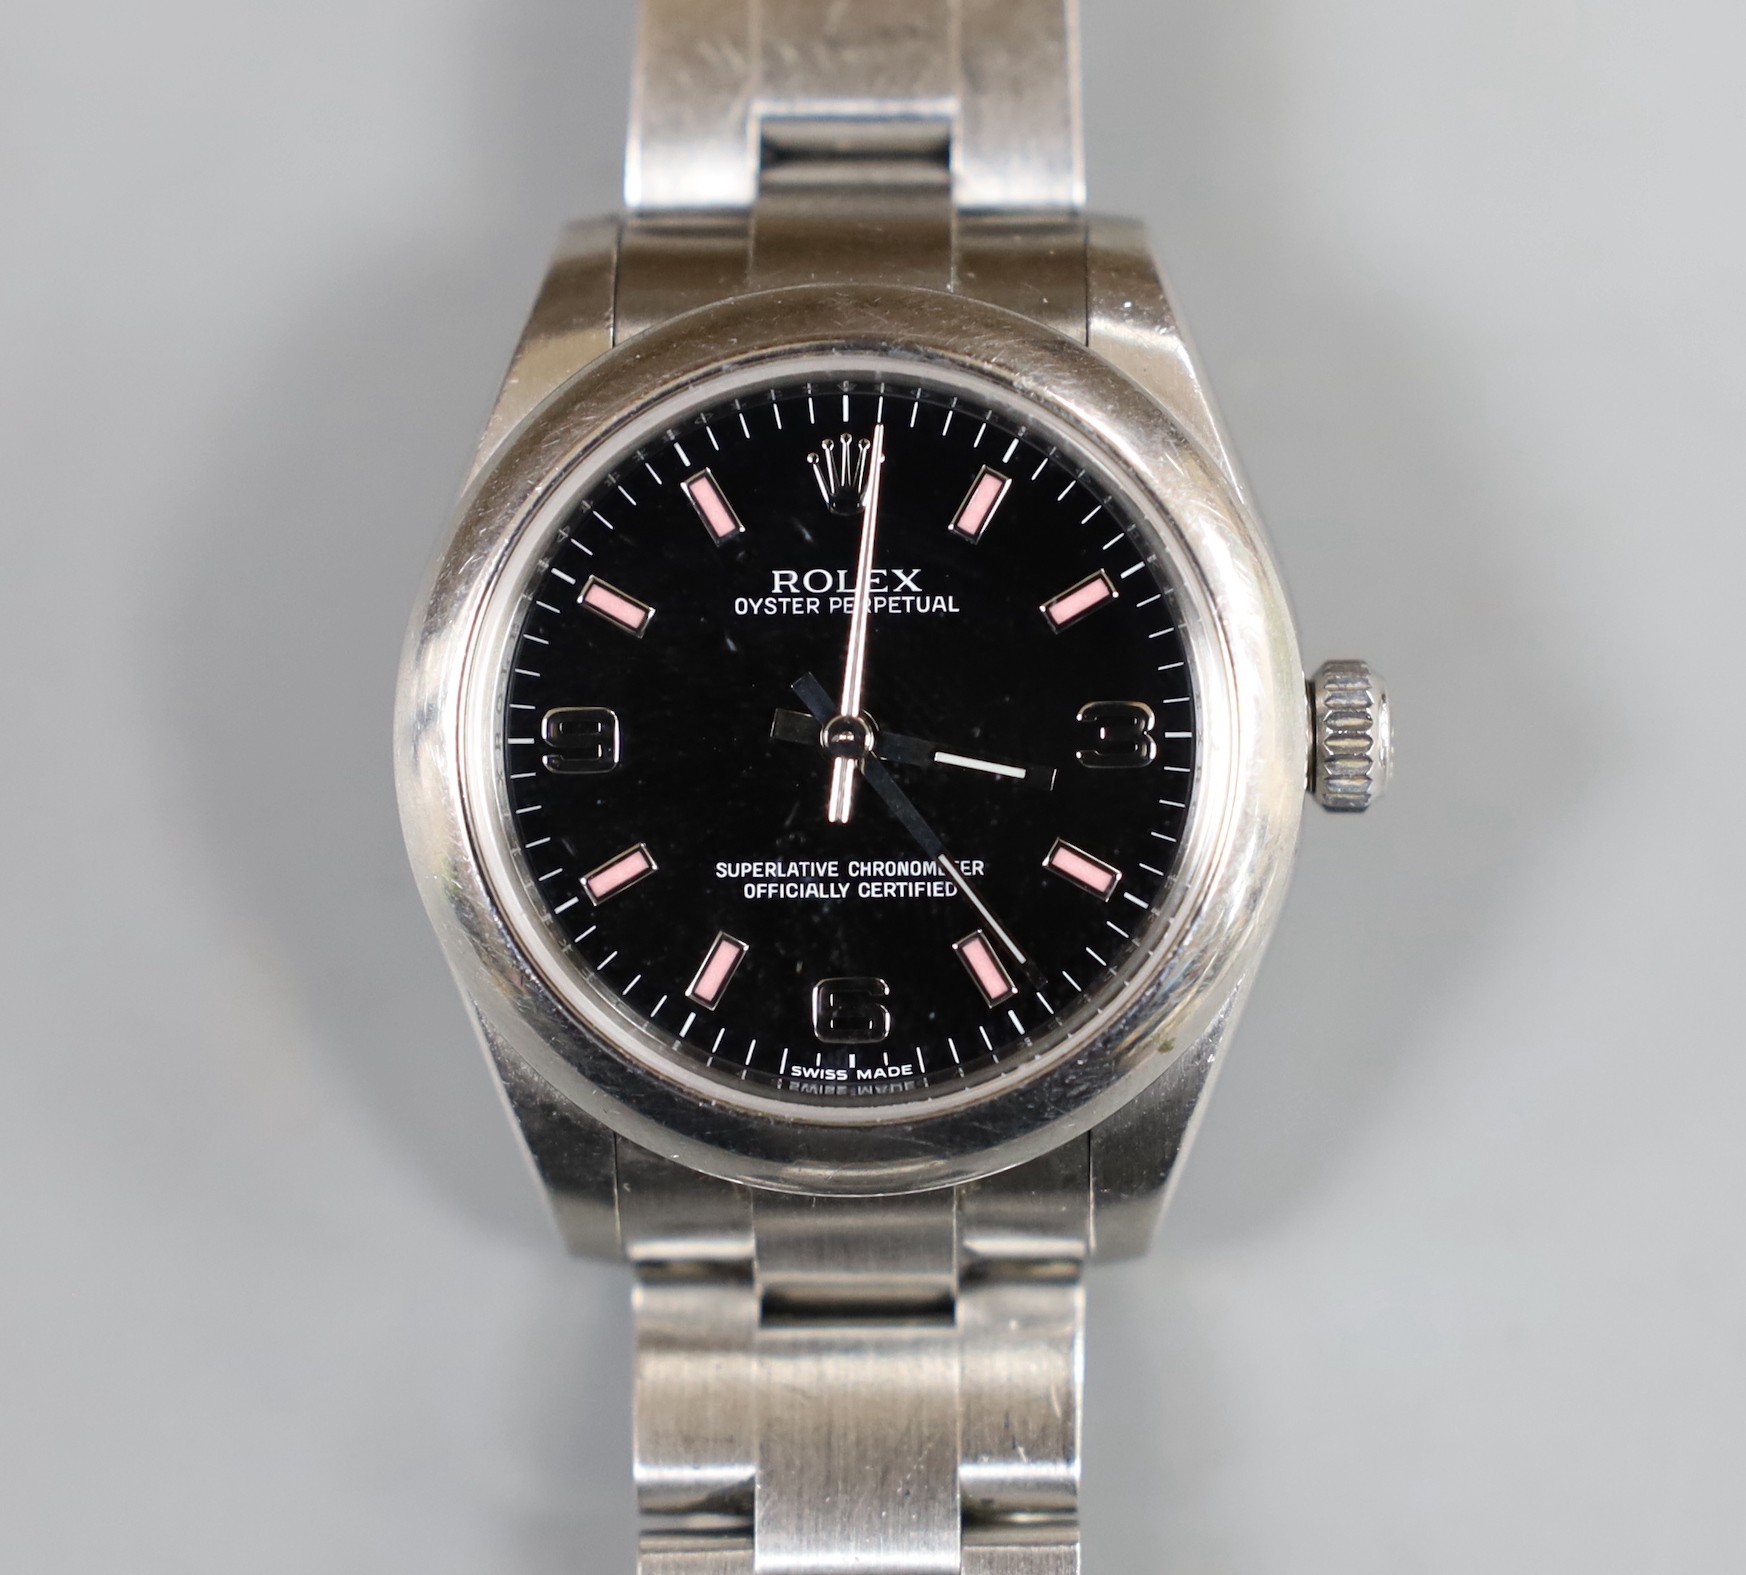 A lady's 2011 stainless steel Rolex Oyster Perpetual wrist watch, on a stainless steel Rolex bracelet, case diameter 31mm, with box and certificate, model no. 177200, serial no. V958067.